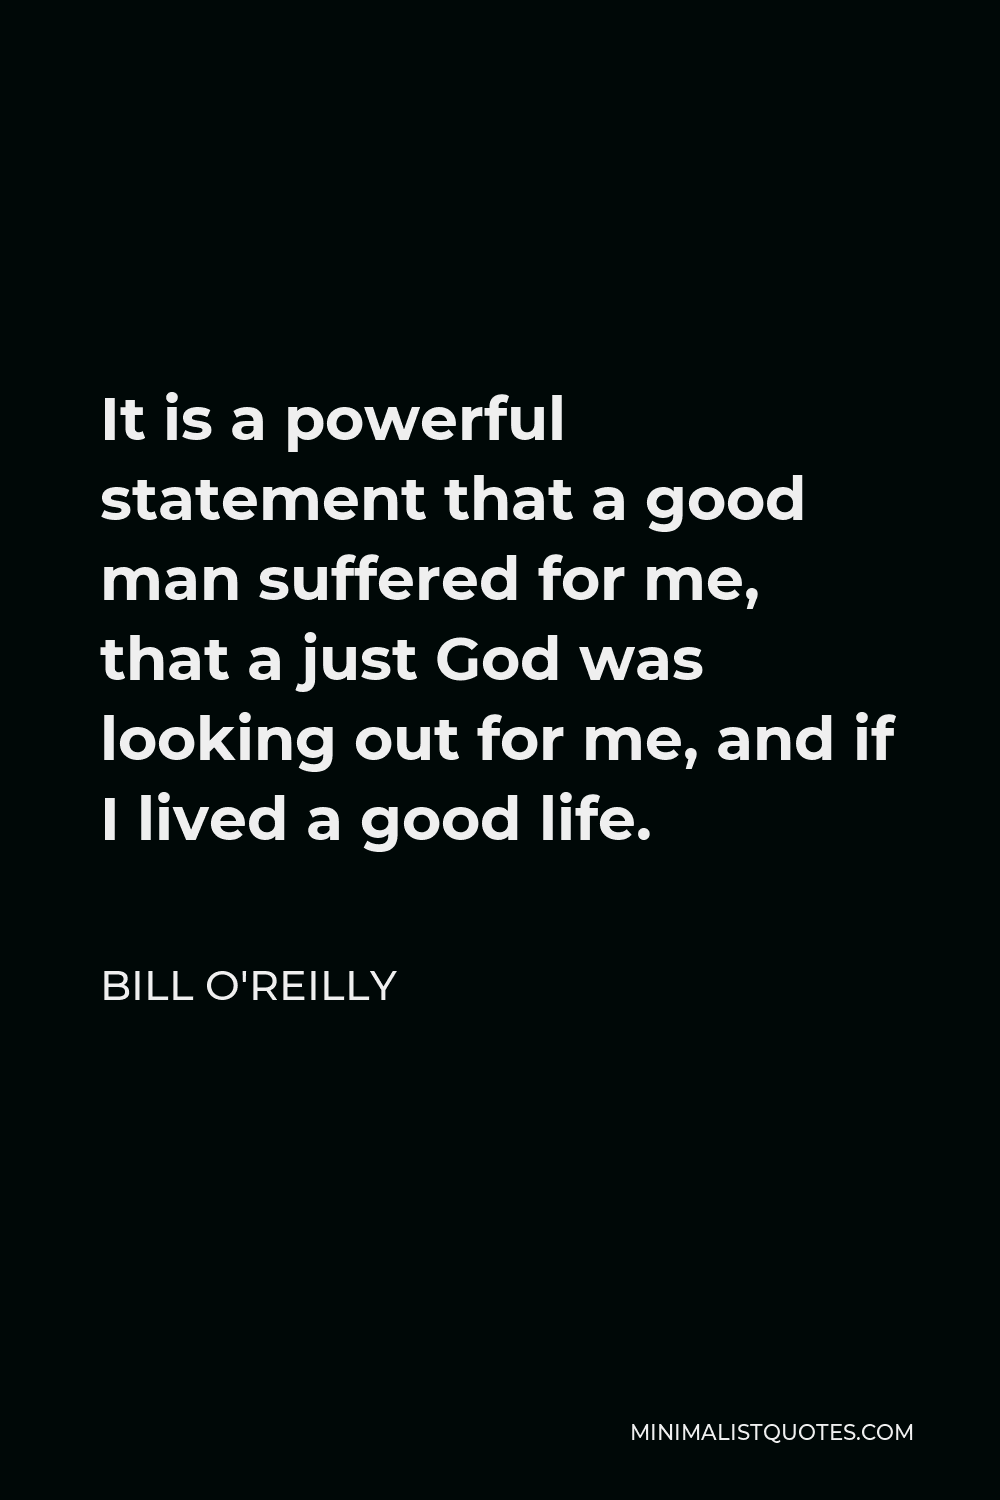 Bill O'Reilly Quote - It is a powerful statement that a good man suffered for me, that a just God was looking out for me, and if I lived a good life.